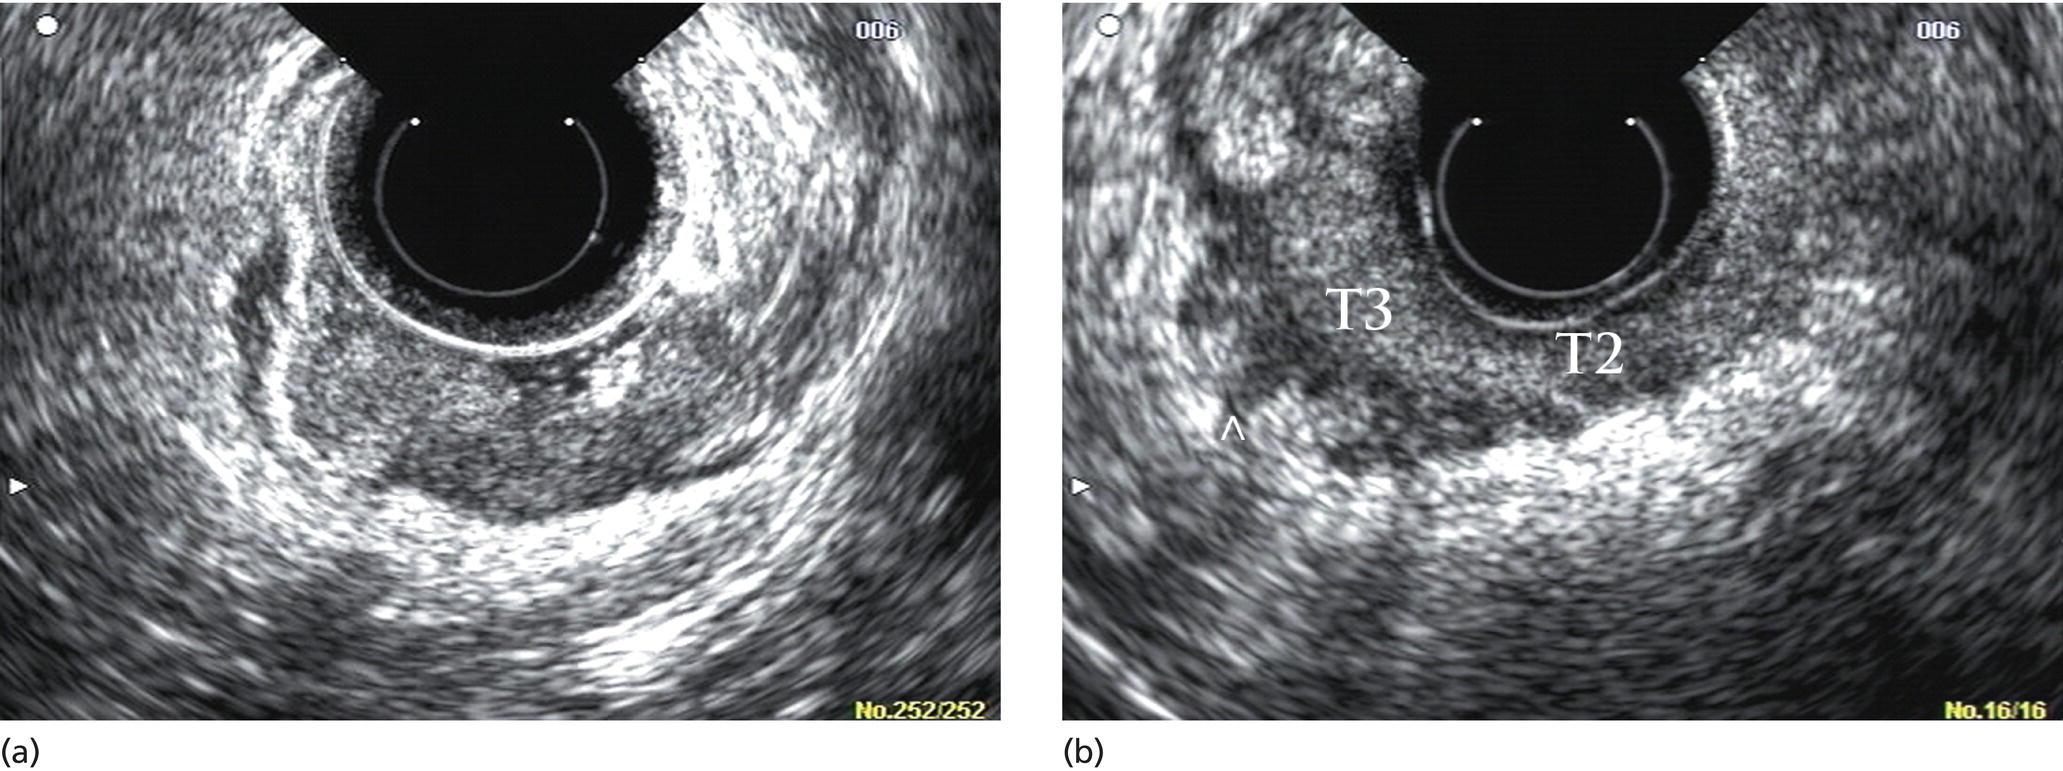 Photos depict (a) A rectal adenocarcinoma that appears to be T2. (b) Radial EUS image of a rectal adenocarcinoma that appears to be T2 in one portion and T3 in another.